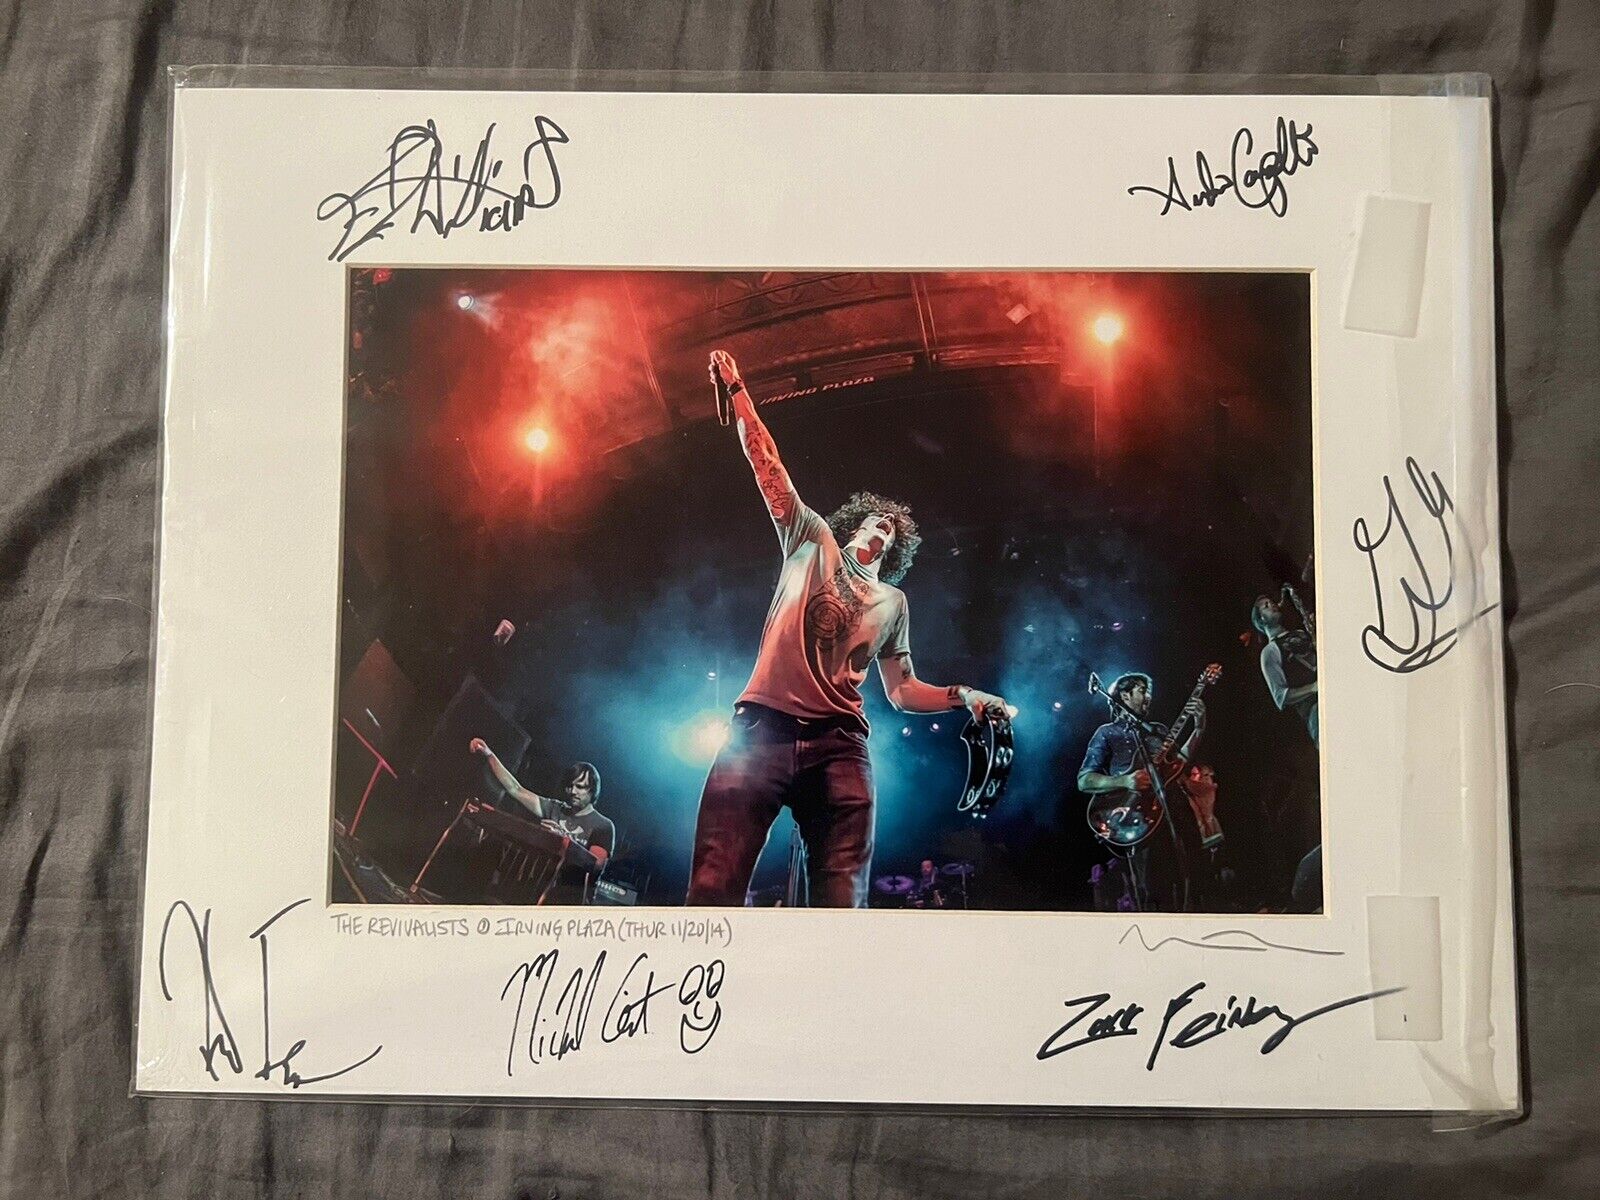 The Revivalists - Signed - Band Autographed Photo